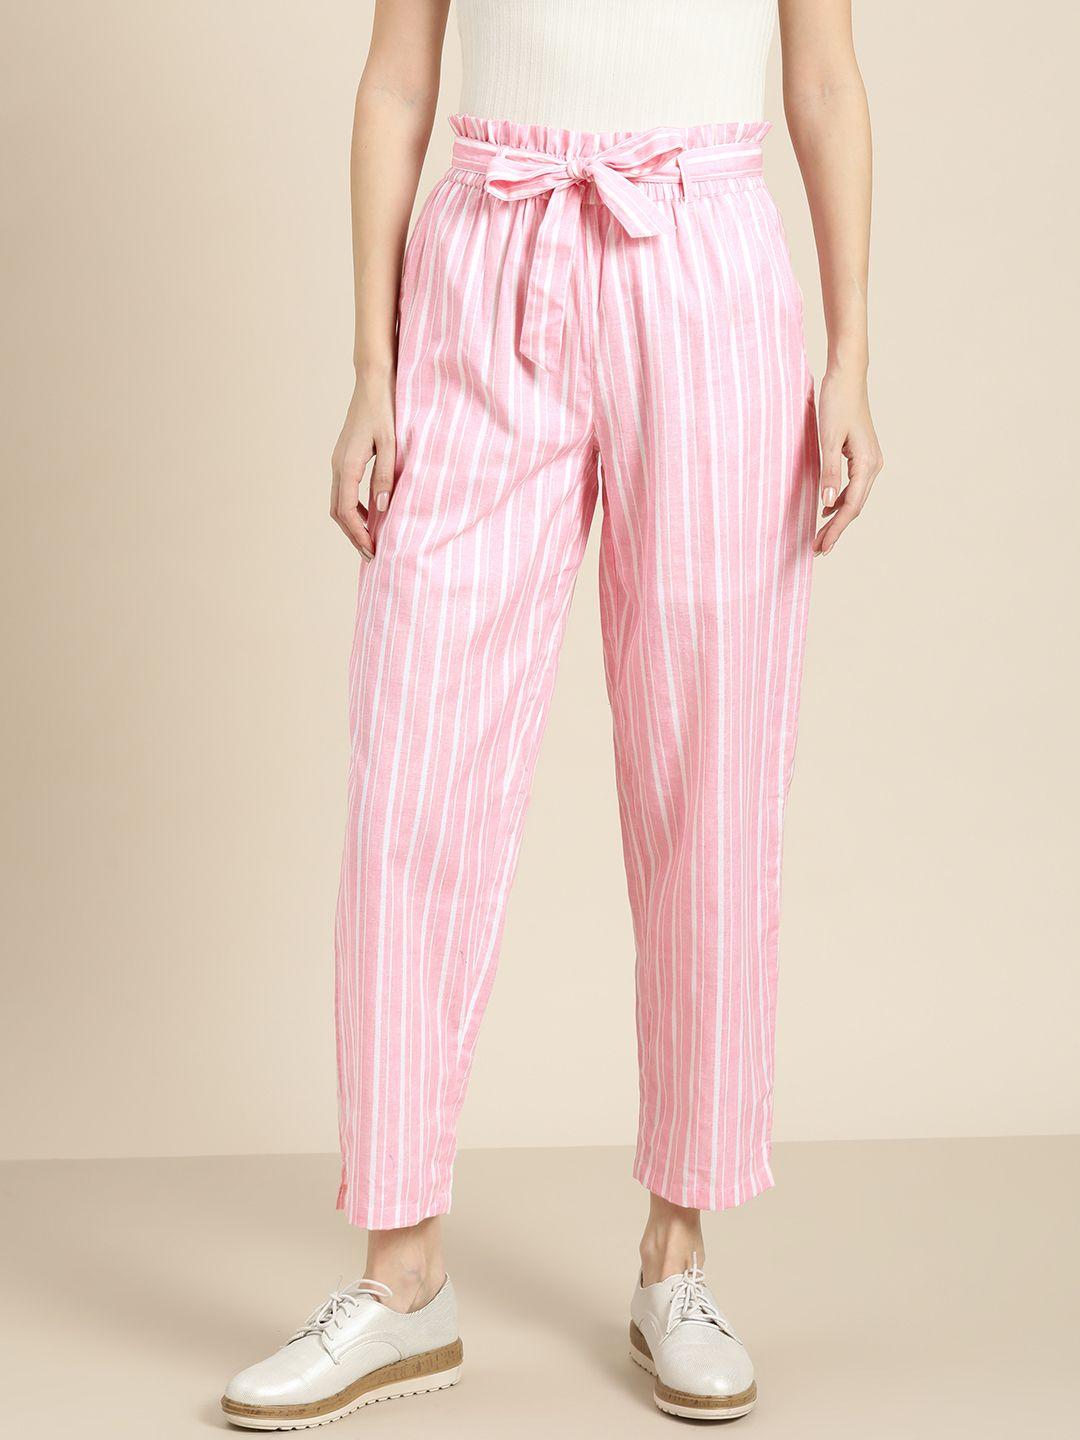 shae by sassafras women pink & white regular fit striped cropped trousers